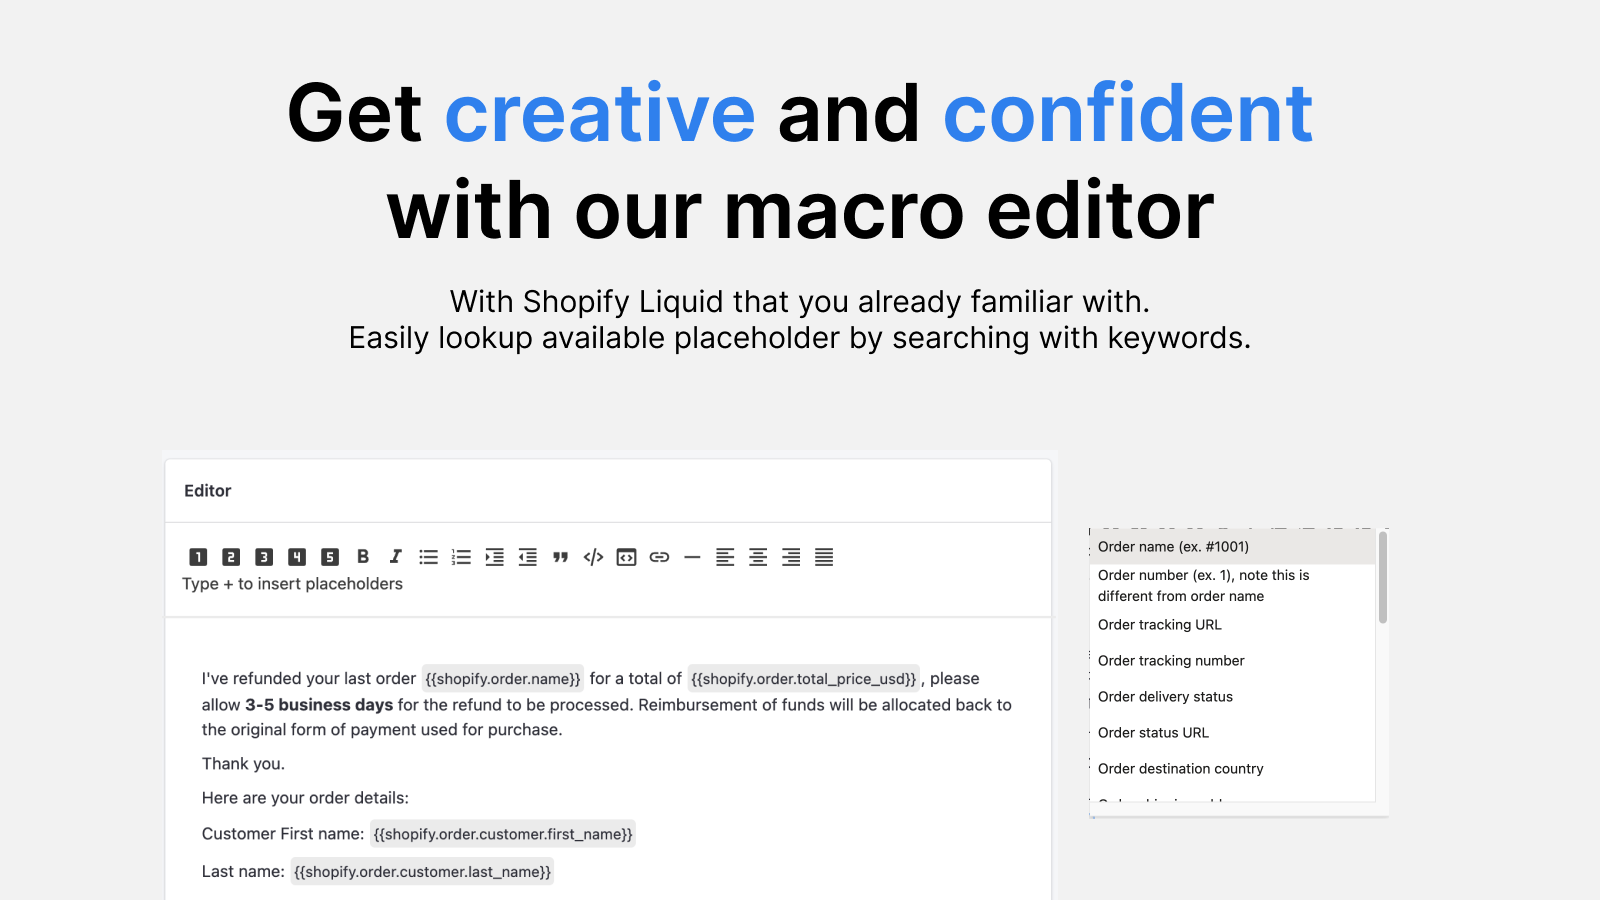 Get creative and confident with our macro editor